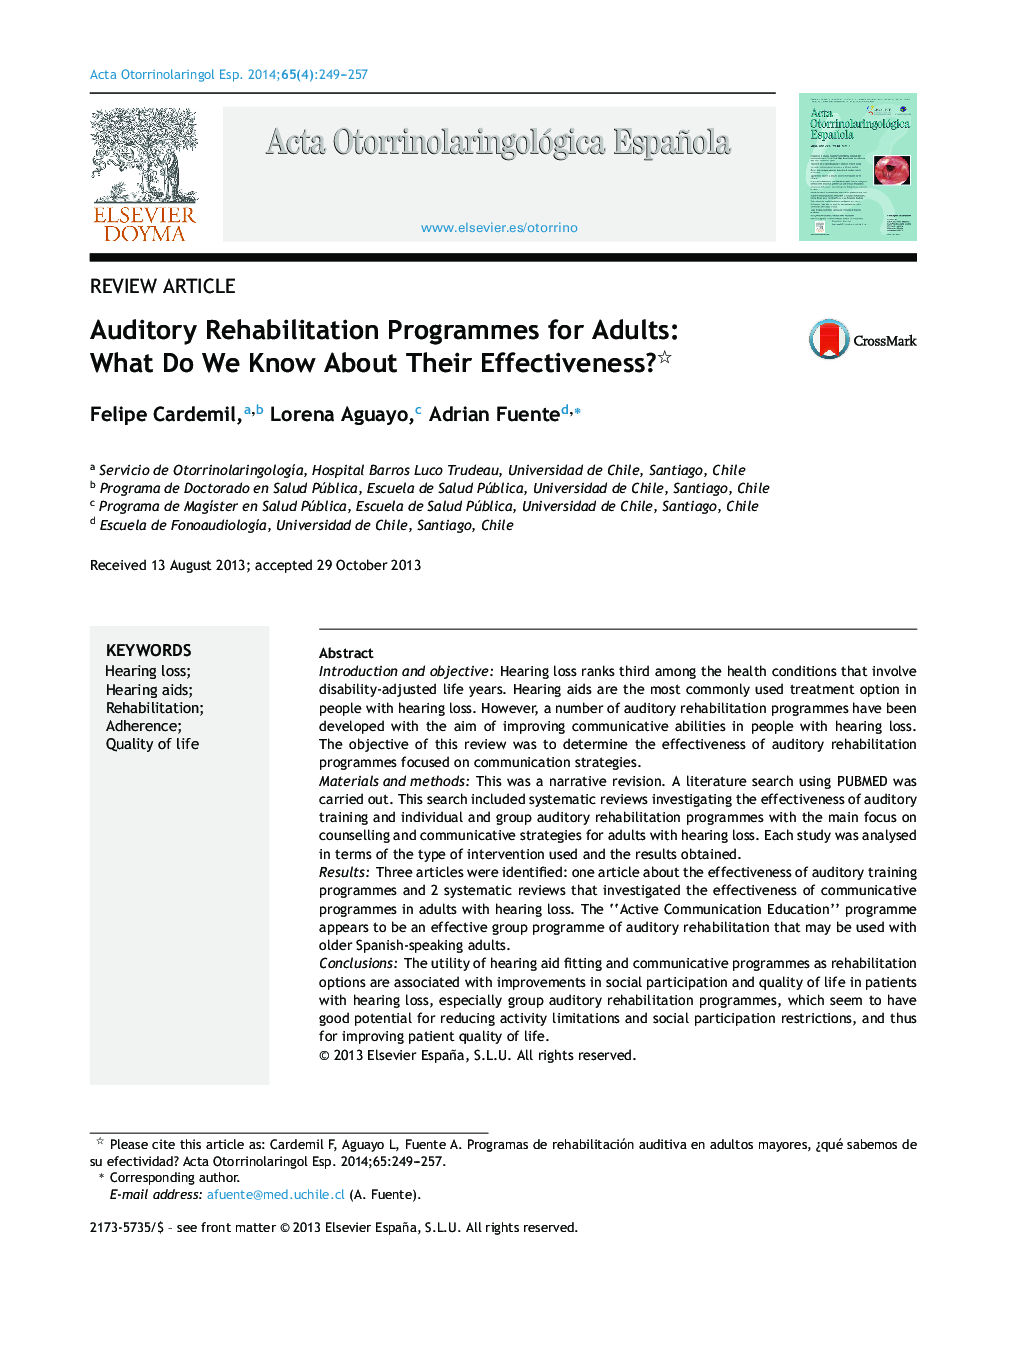 Auditory Rehabilitation Programmes for Adults: What Do We Know About Their Effectiveness? 